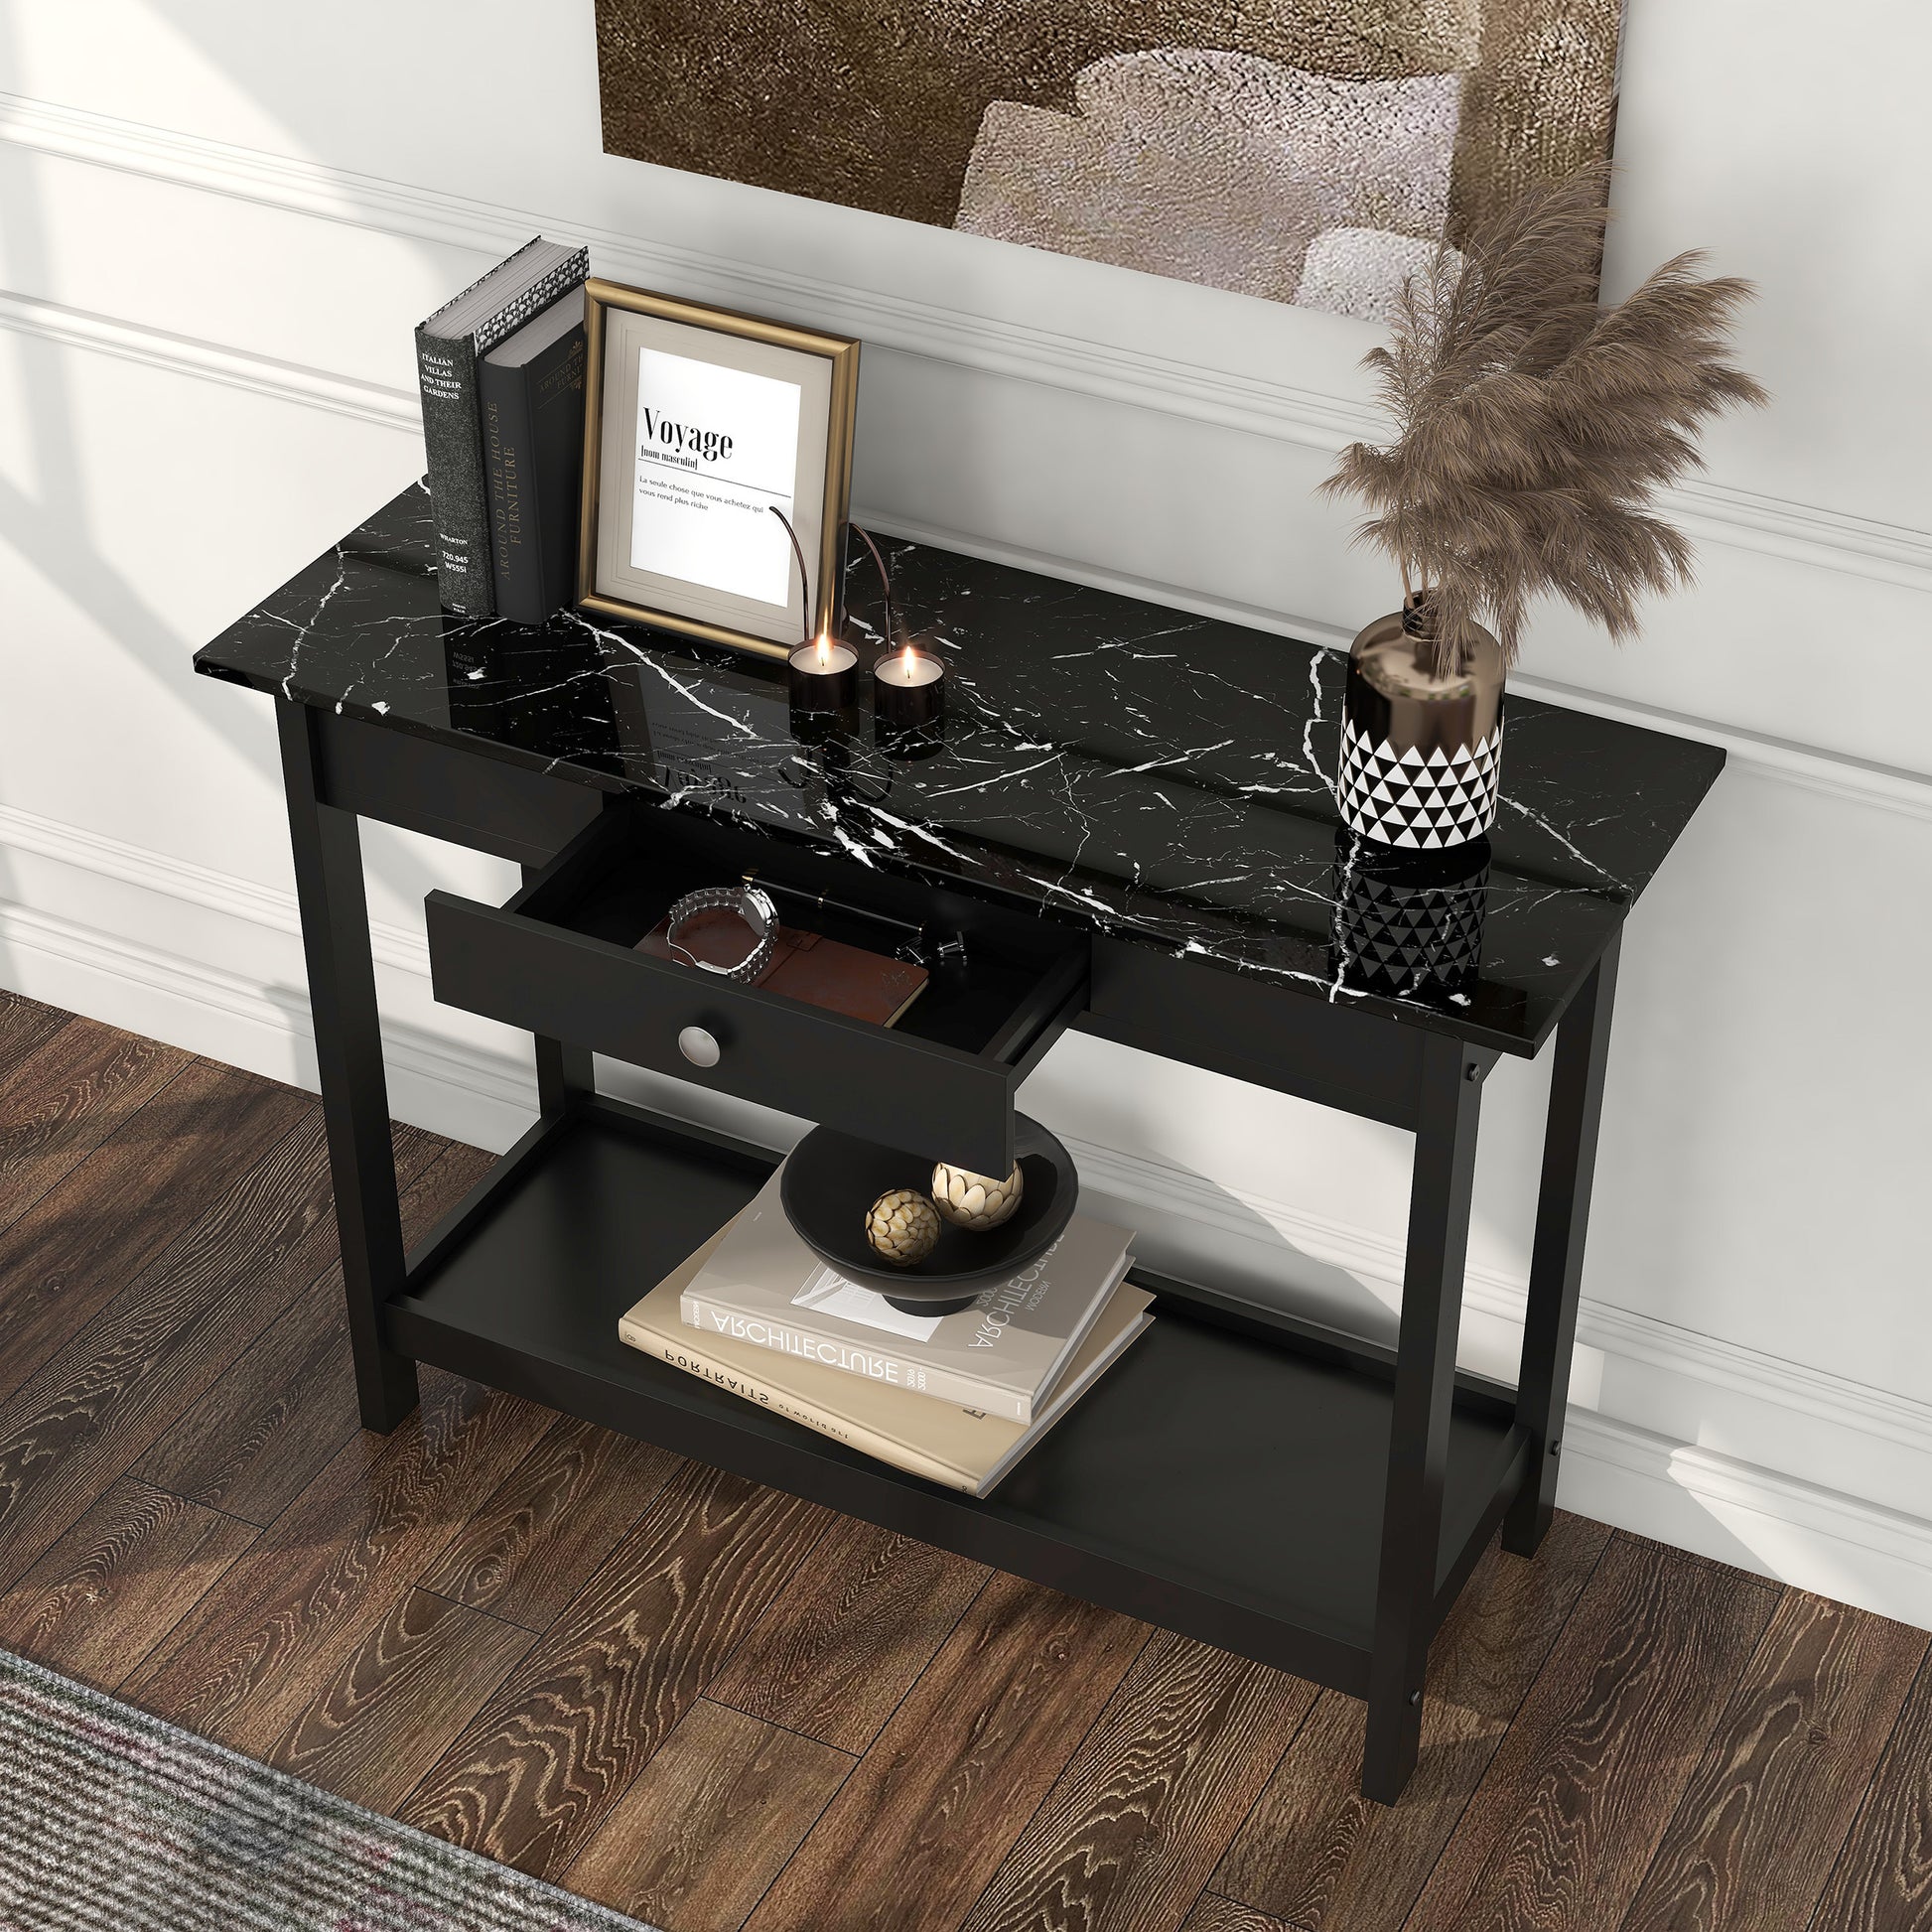 Left angled bird's eye view of a modern black and faux marble one-drawer console table with a lower shelf and drawer open in a living area with accessories